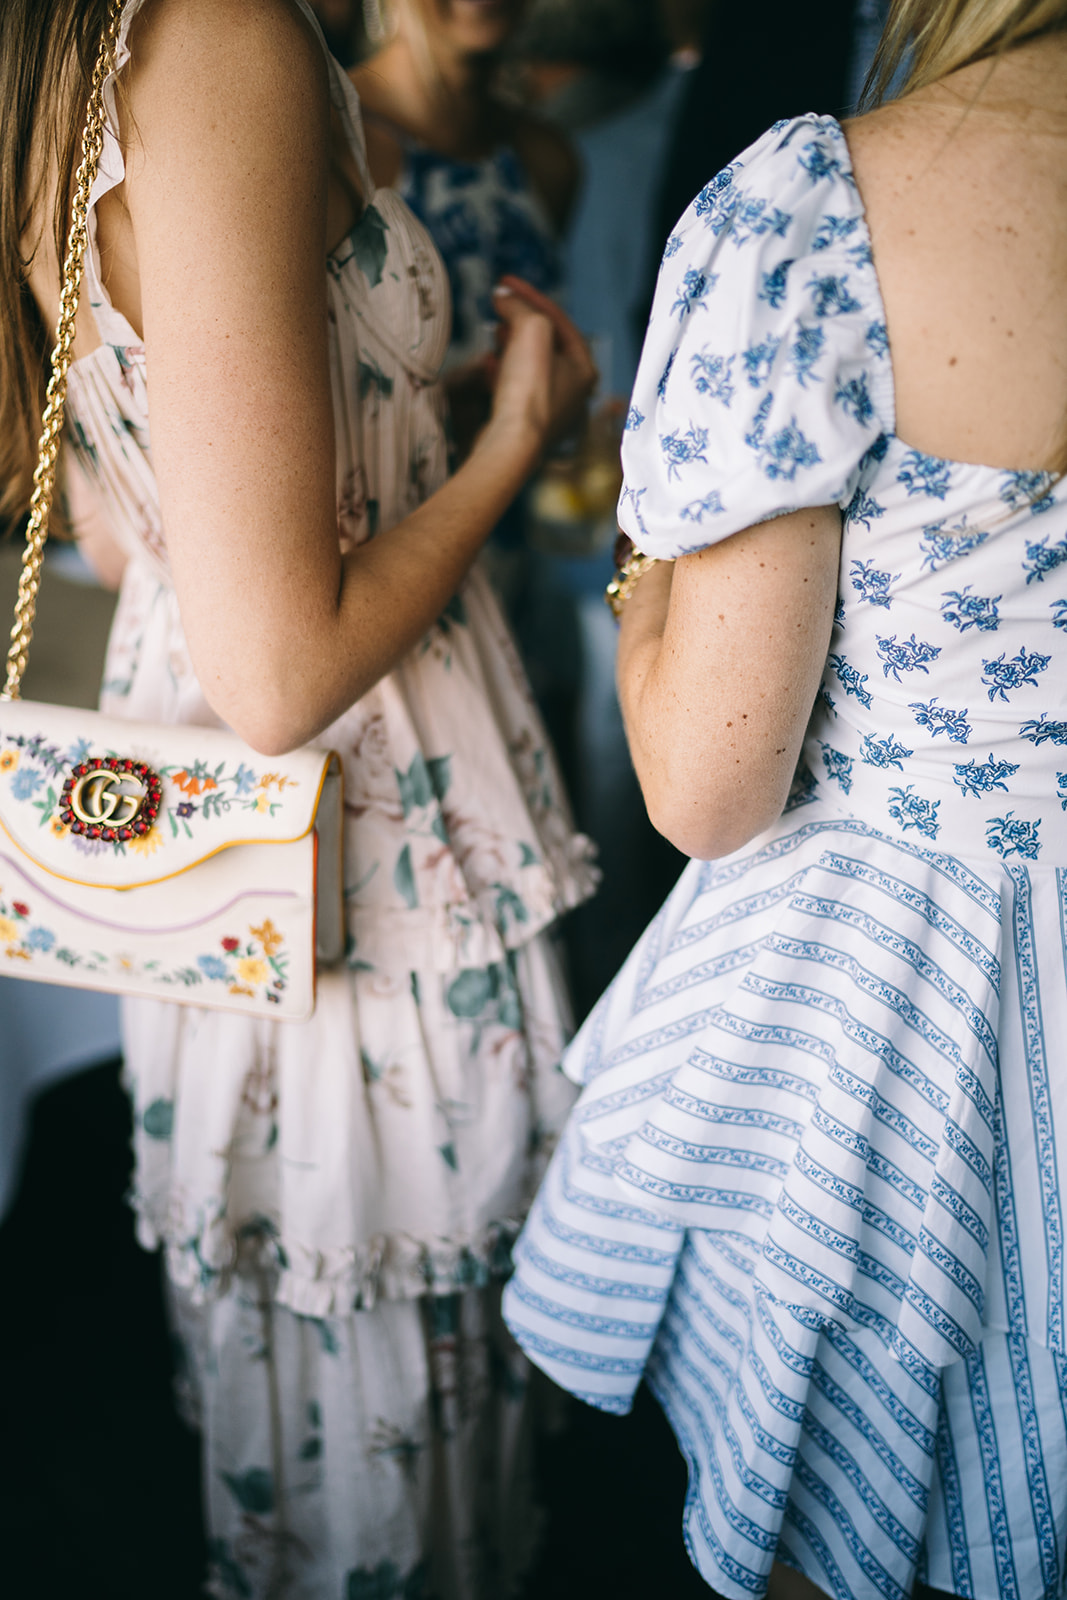 Two women standing. One of them is wearing a blue and white dress and the other is wearing a flowery dress holding a Gucci bag